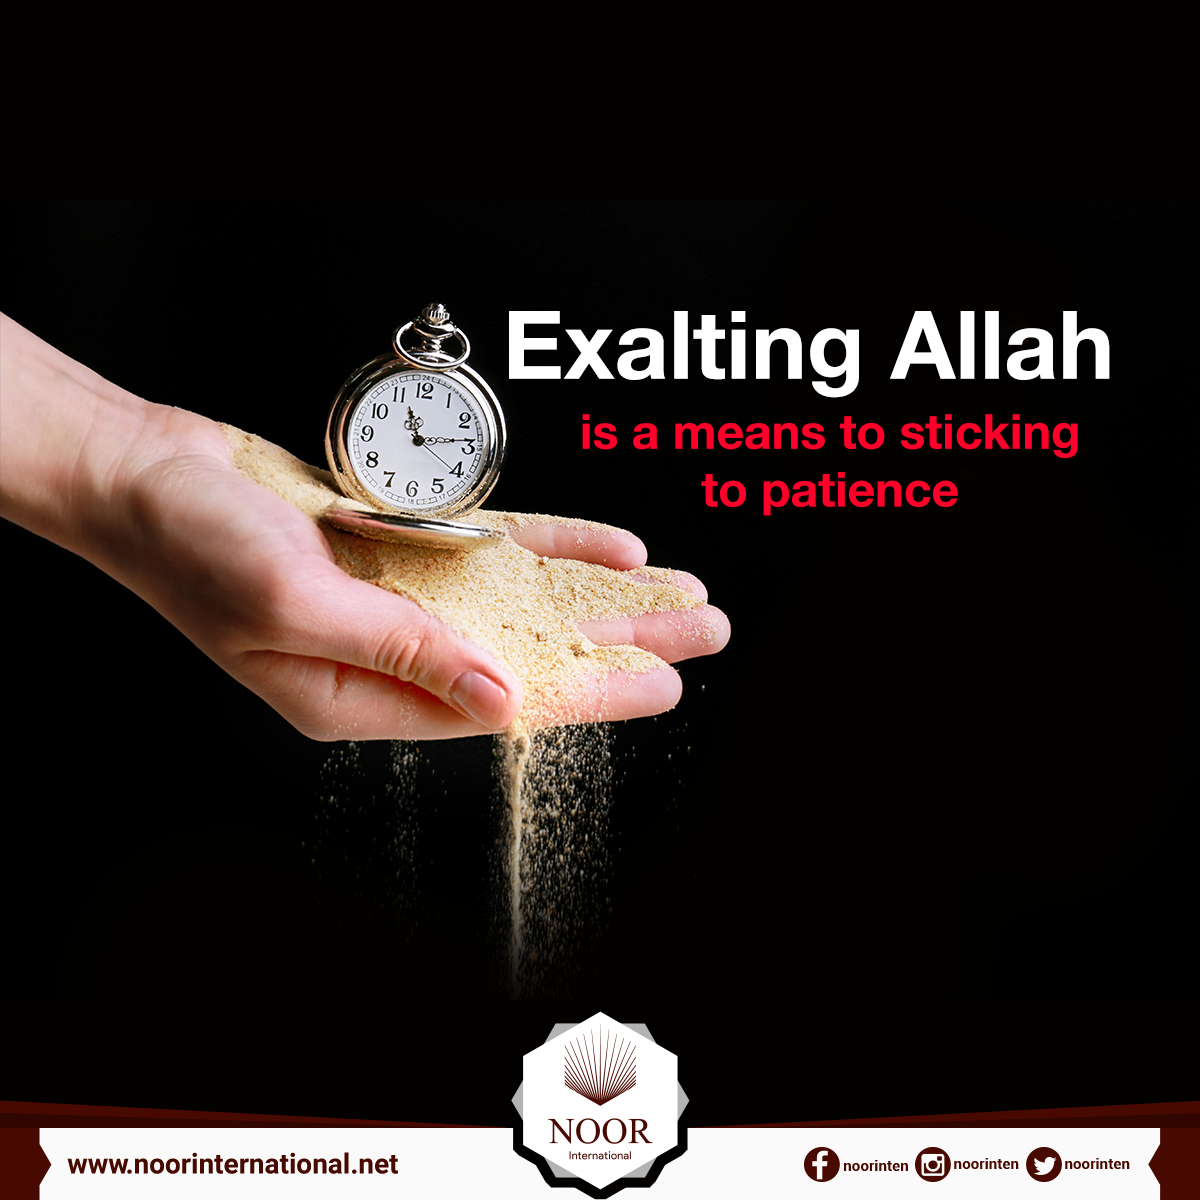 Exalting Allah is a means to sticking to patience